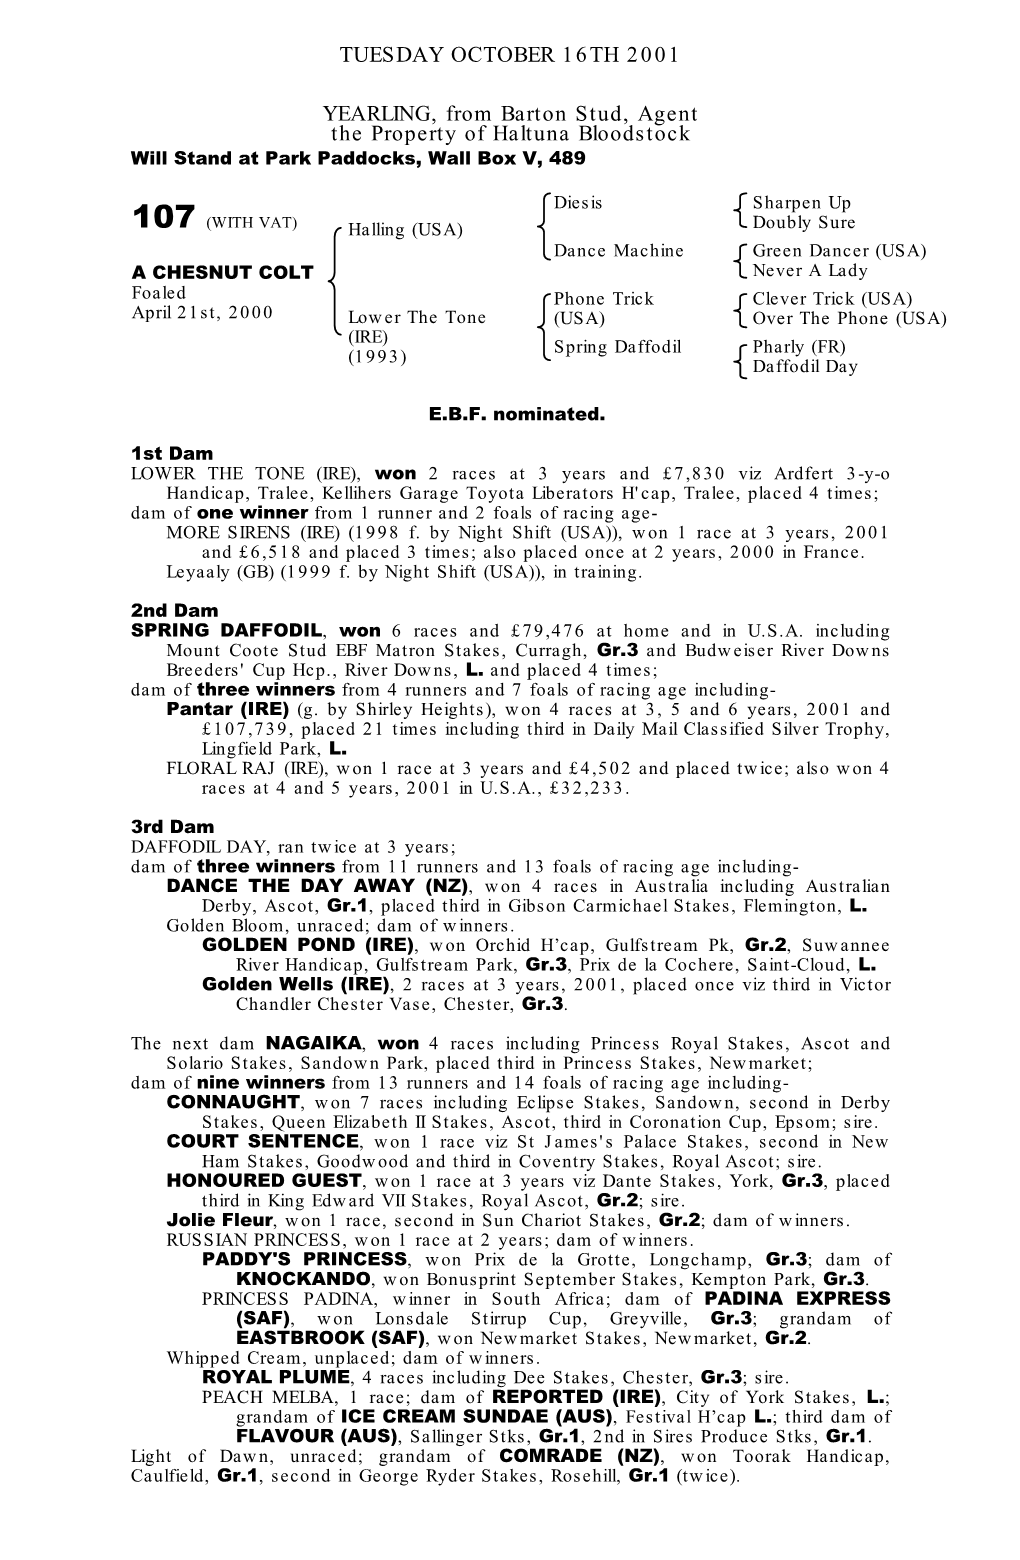 TUESDAY OCTOBER 16TH 2001 YEARLING, from Barton Stud, Agent the Property of Haltuna Bloodstock